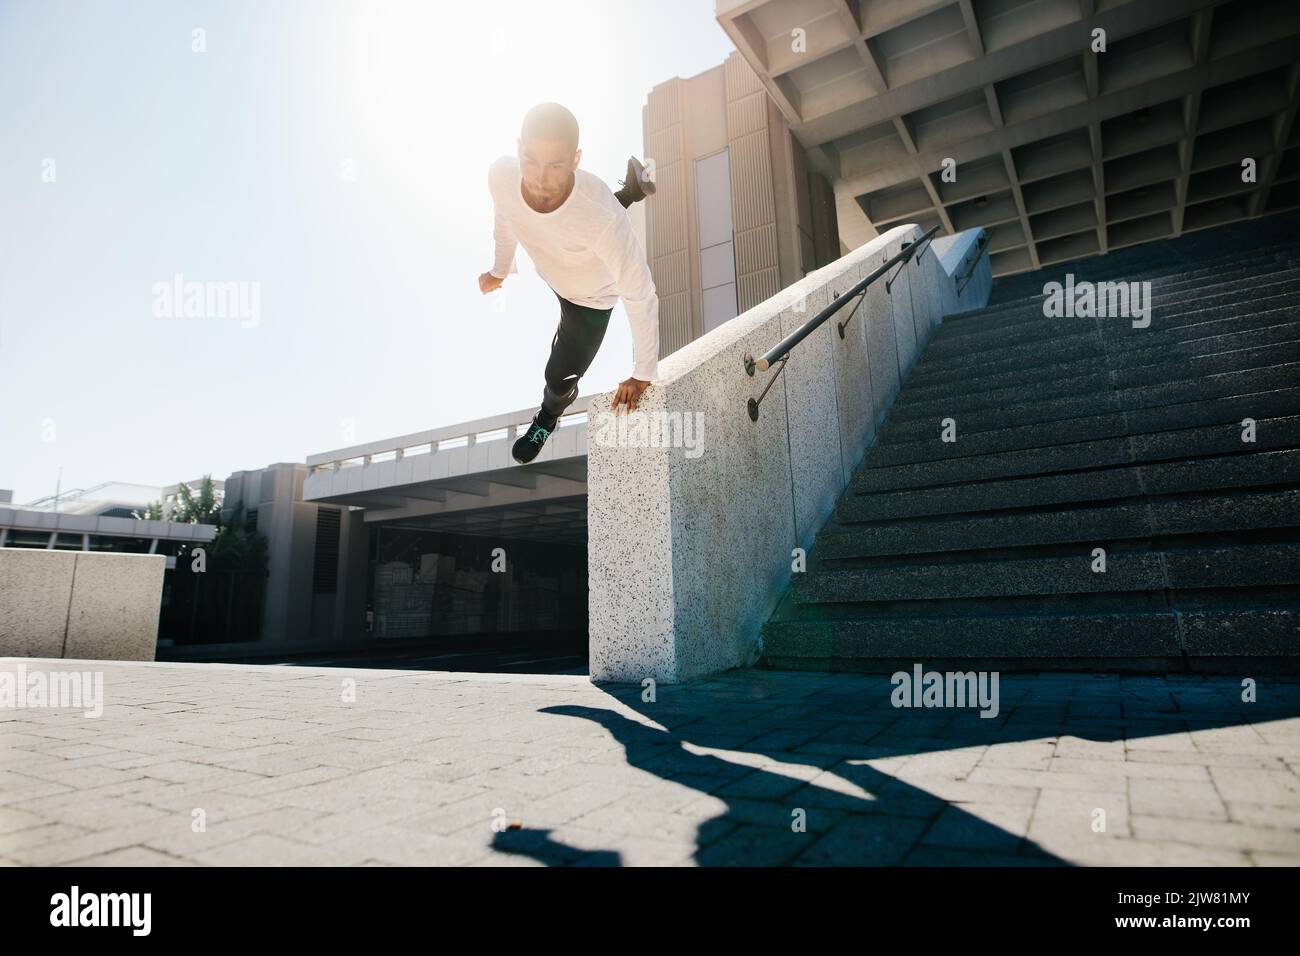 Urban free runner doing a wall spin. Young sportsman practicing parkour and free running outdoors. Parkour in an urban space. Stock Photo